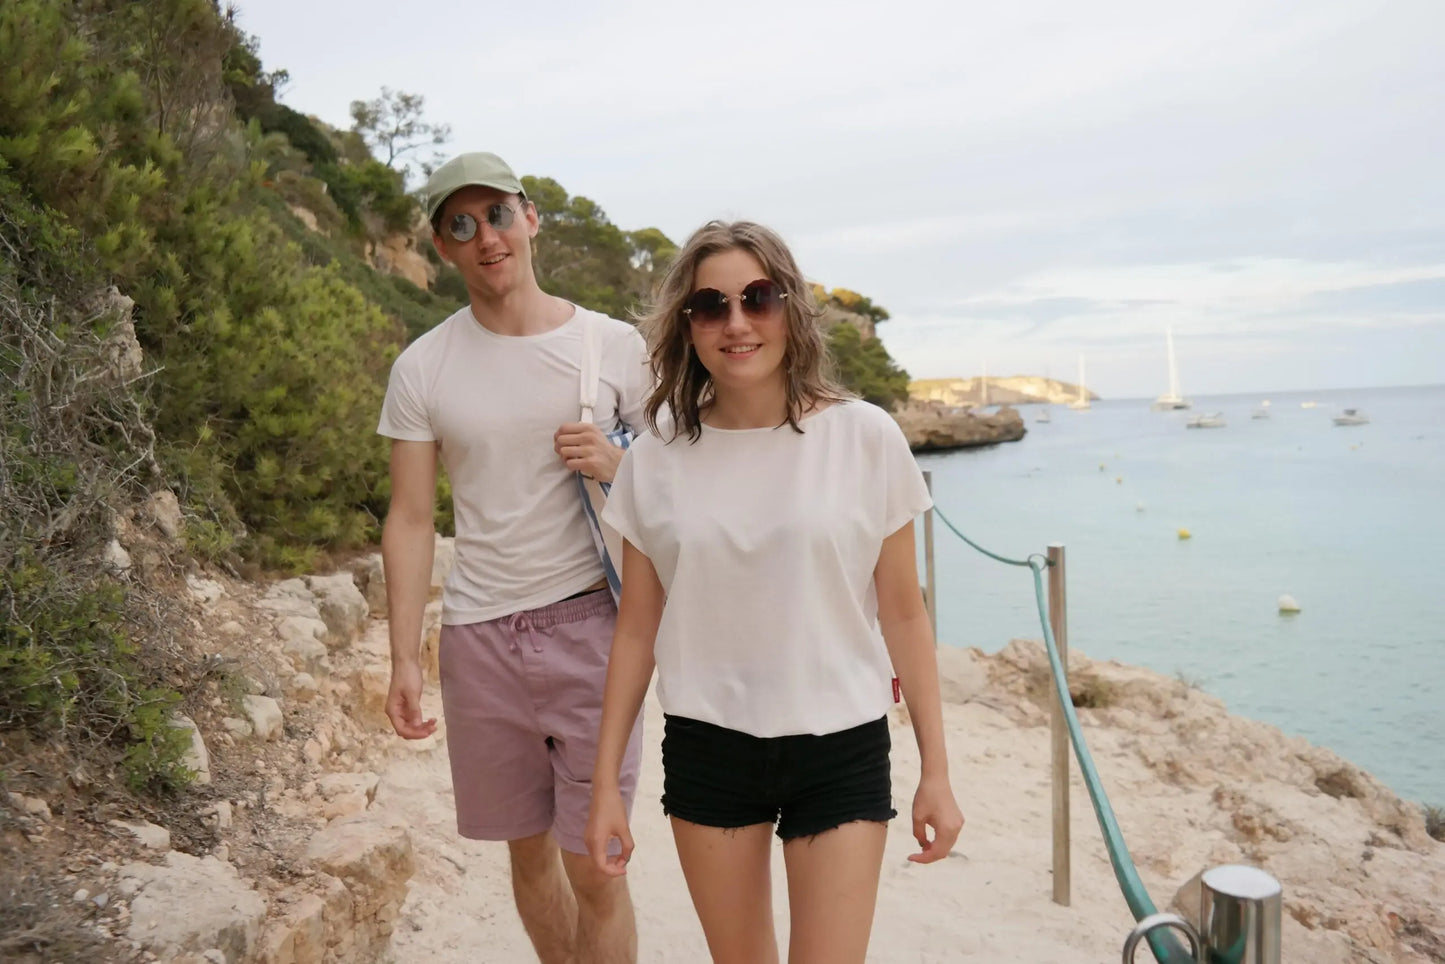 A man and woman in white shirts walk near water, wearing tan-through coral spacious T-shirts for outdoor activities. The fabric allows healthy tanning with UVA ray penetration. Sizes XS-XXL available.